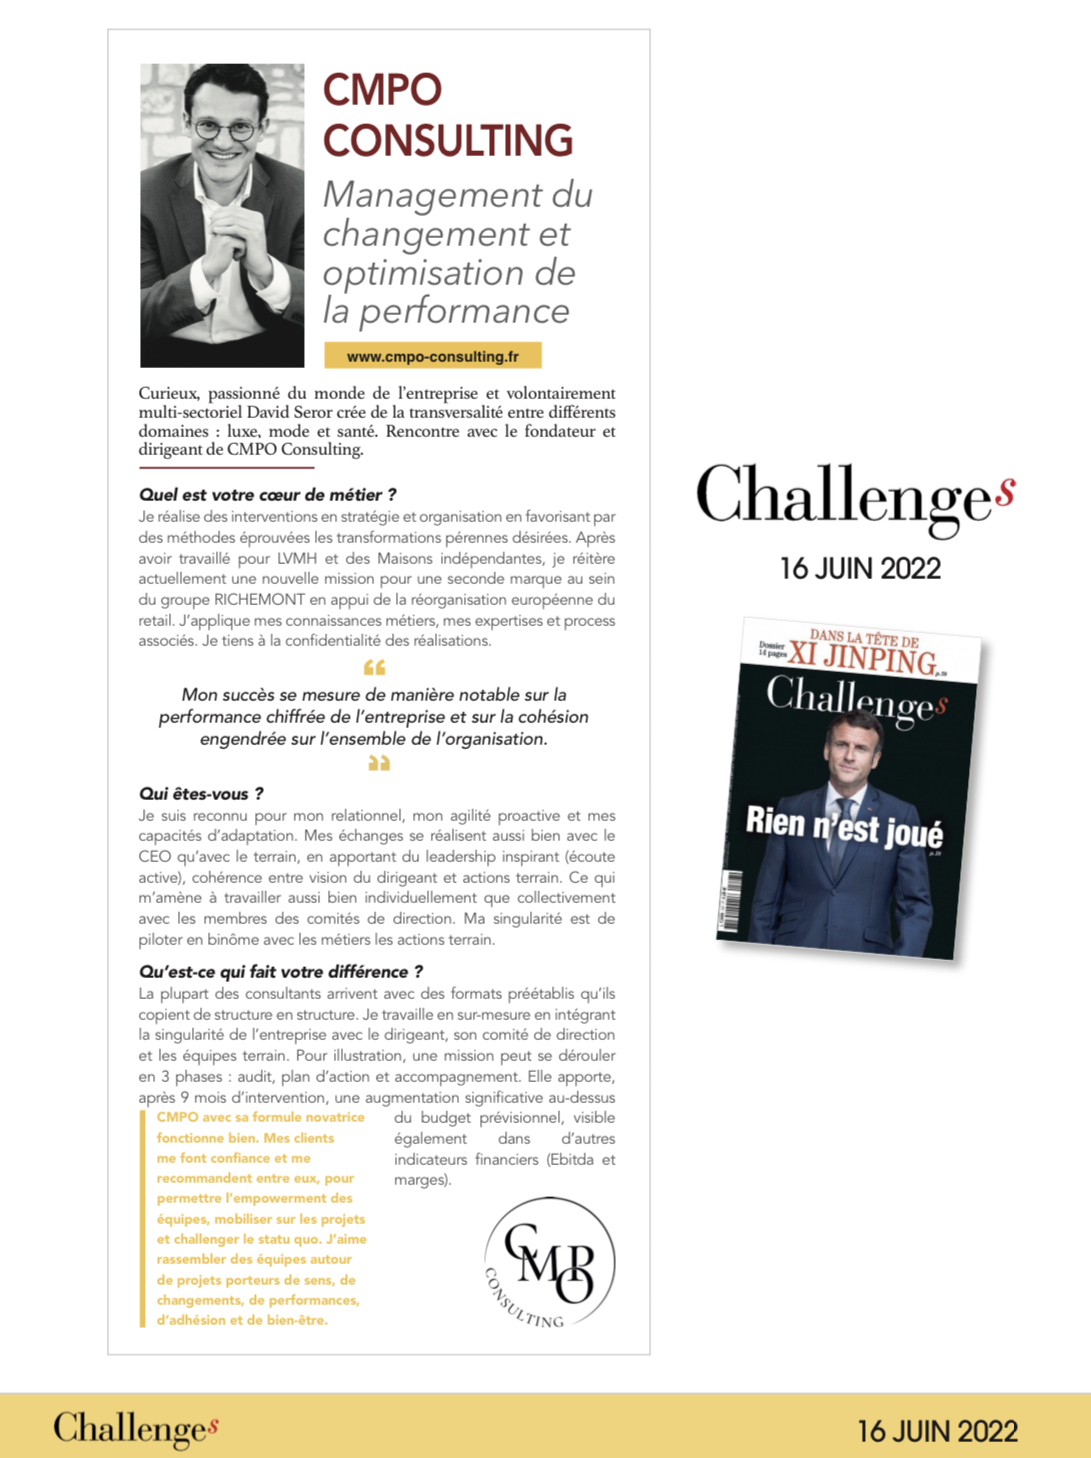 CMPO CONSULTING - Magazine Challenges